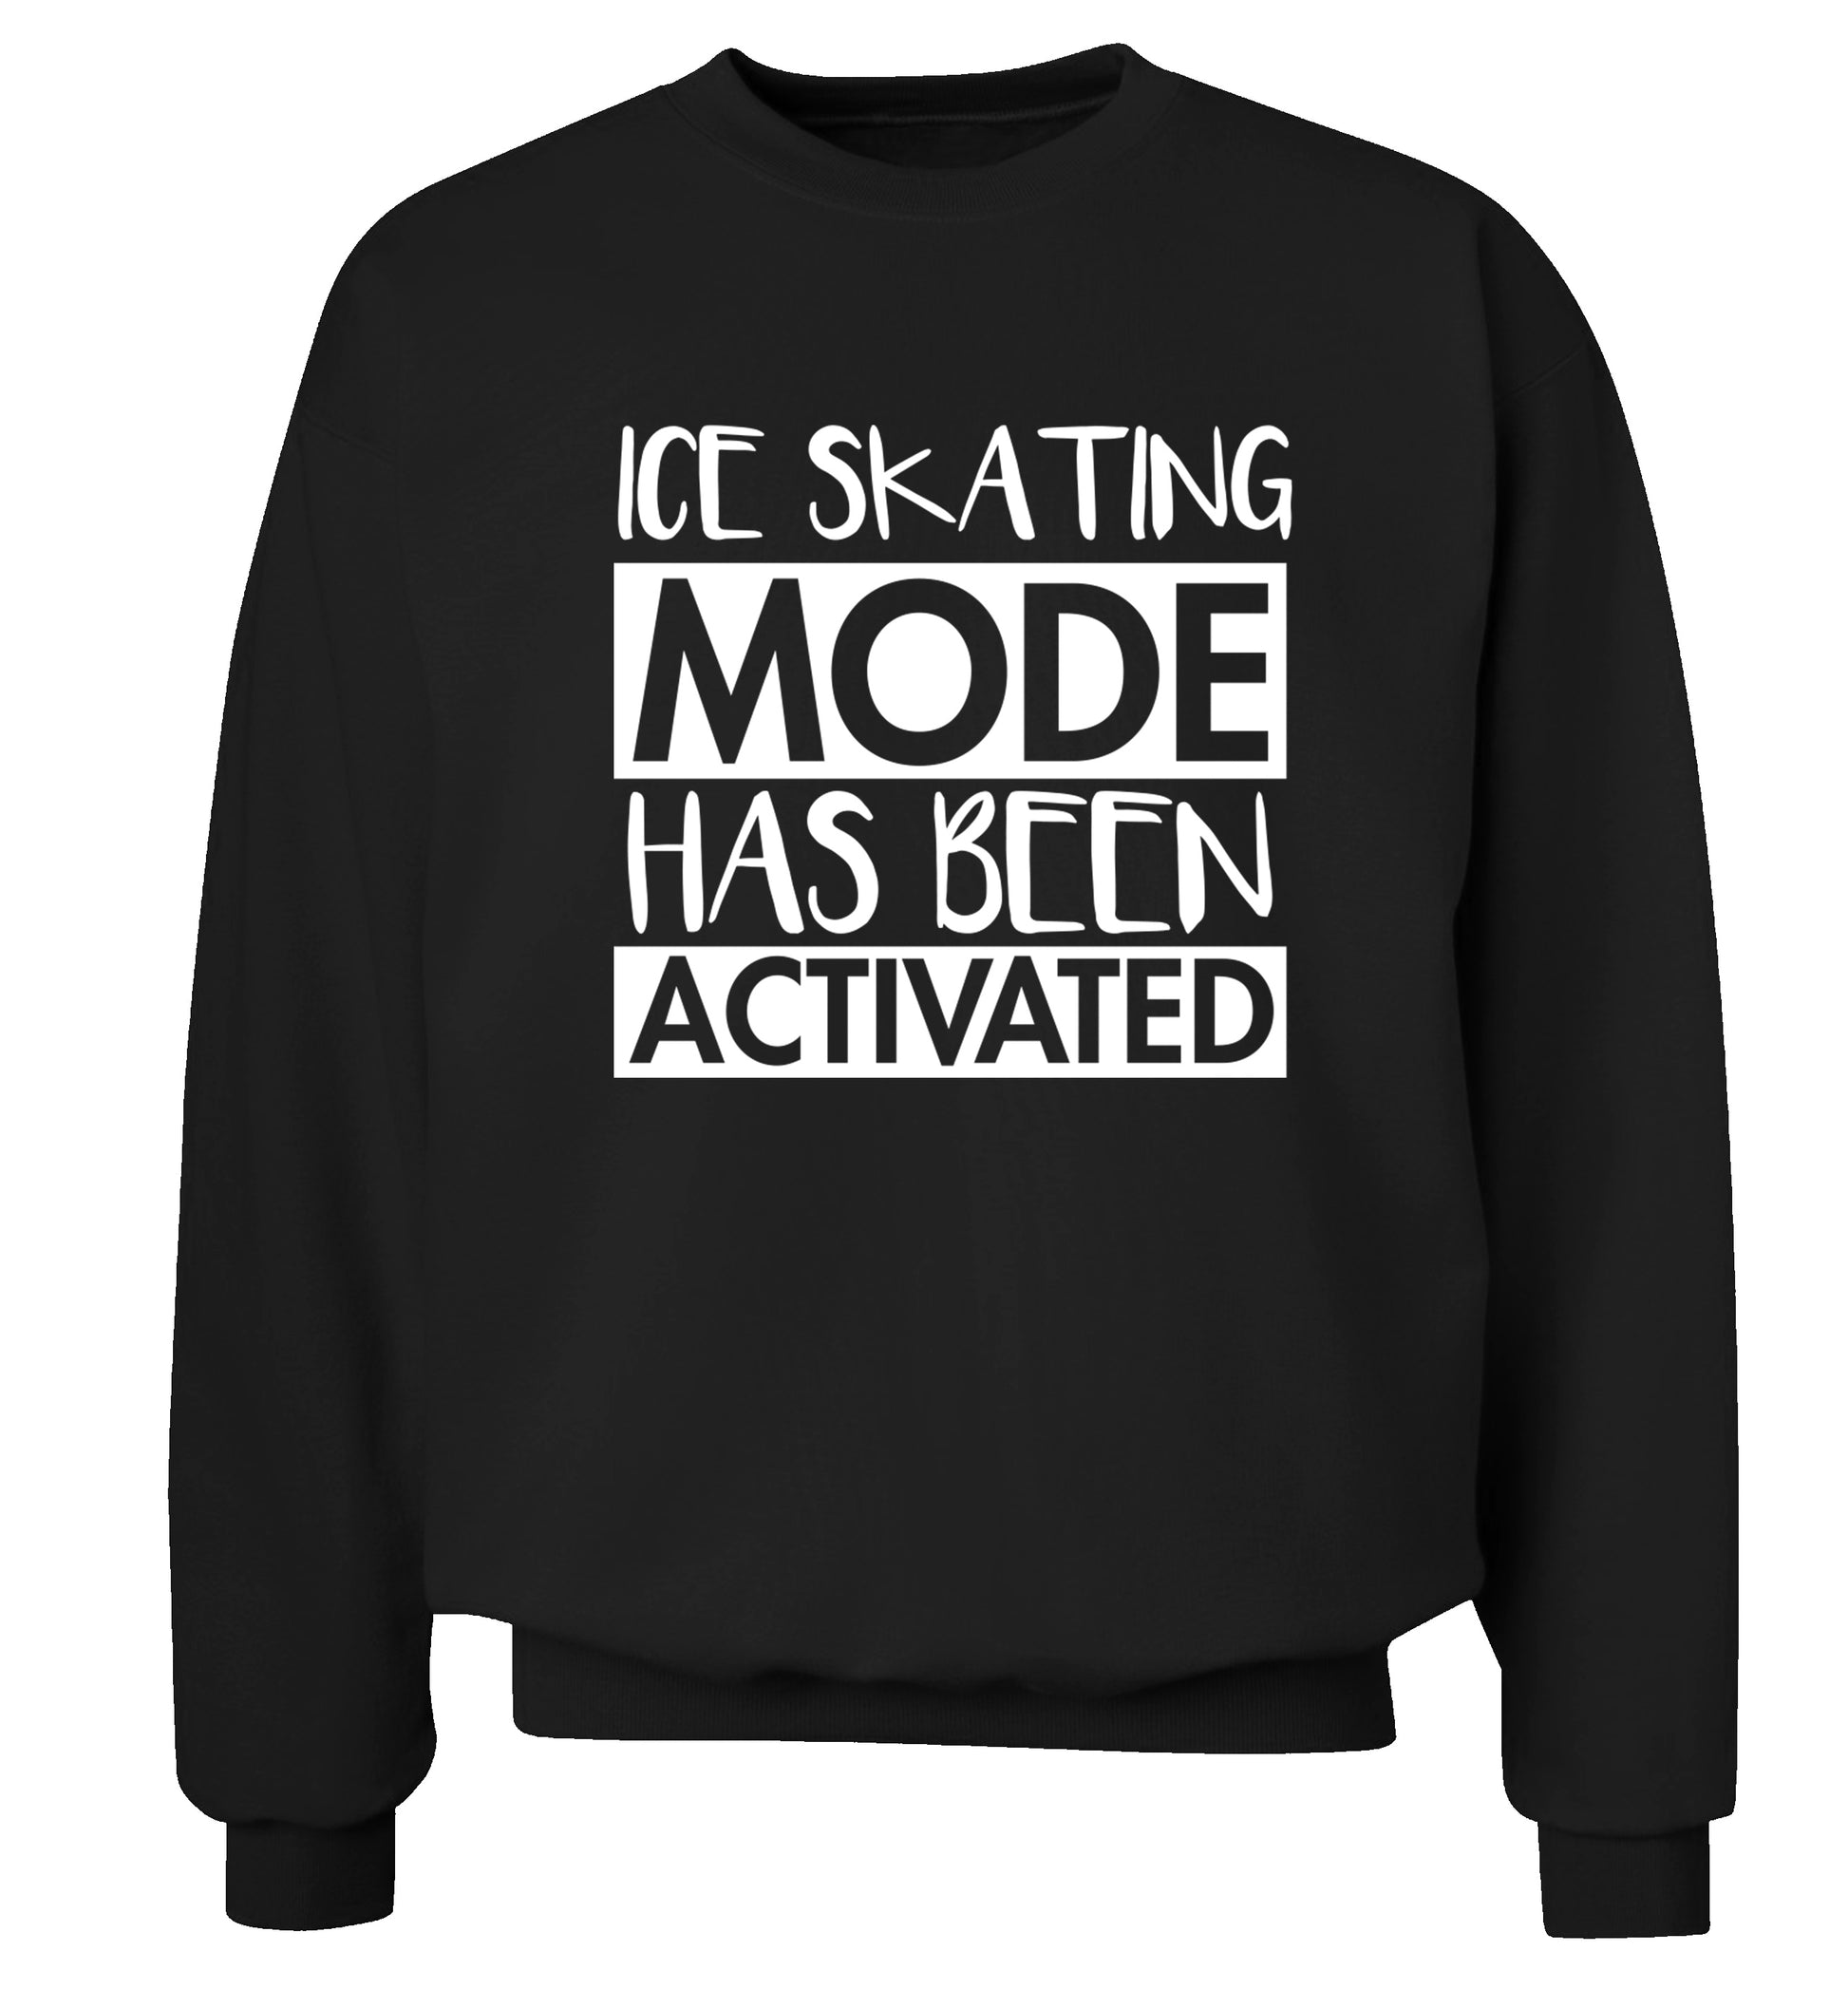 Ice skating mode activated Adult's unisexblack Sweater 2XL